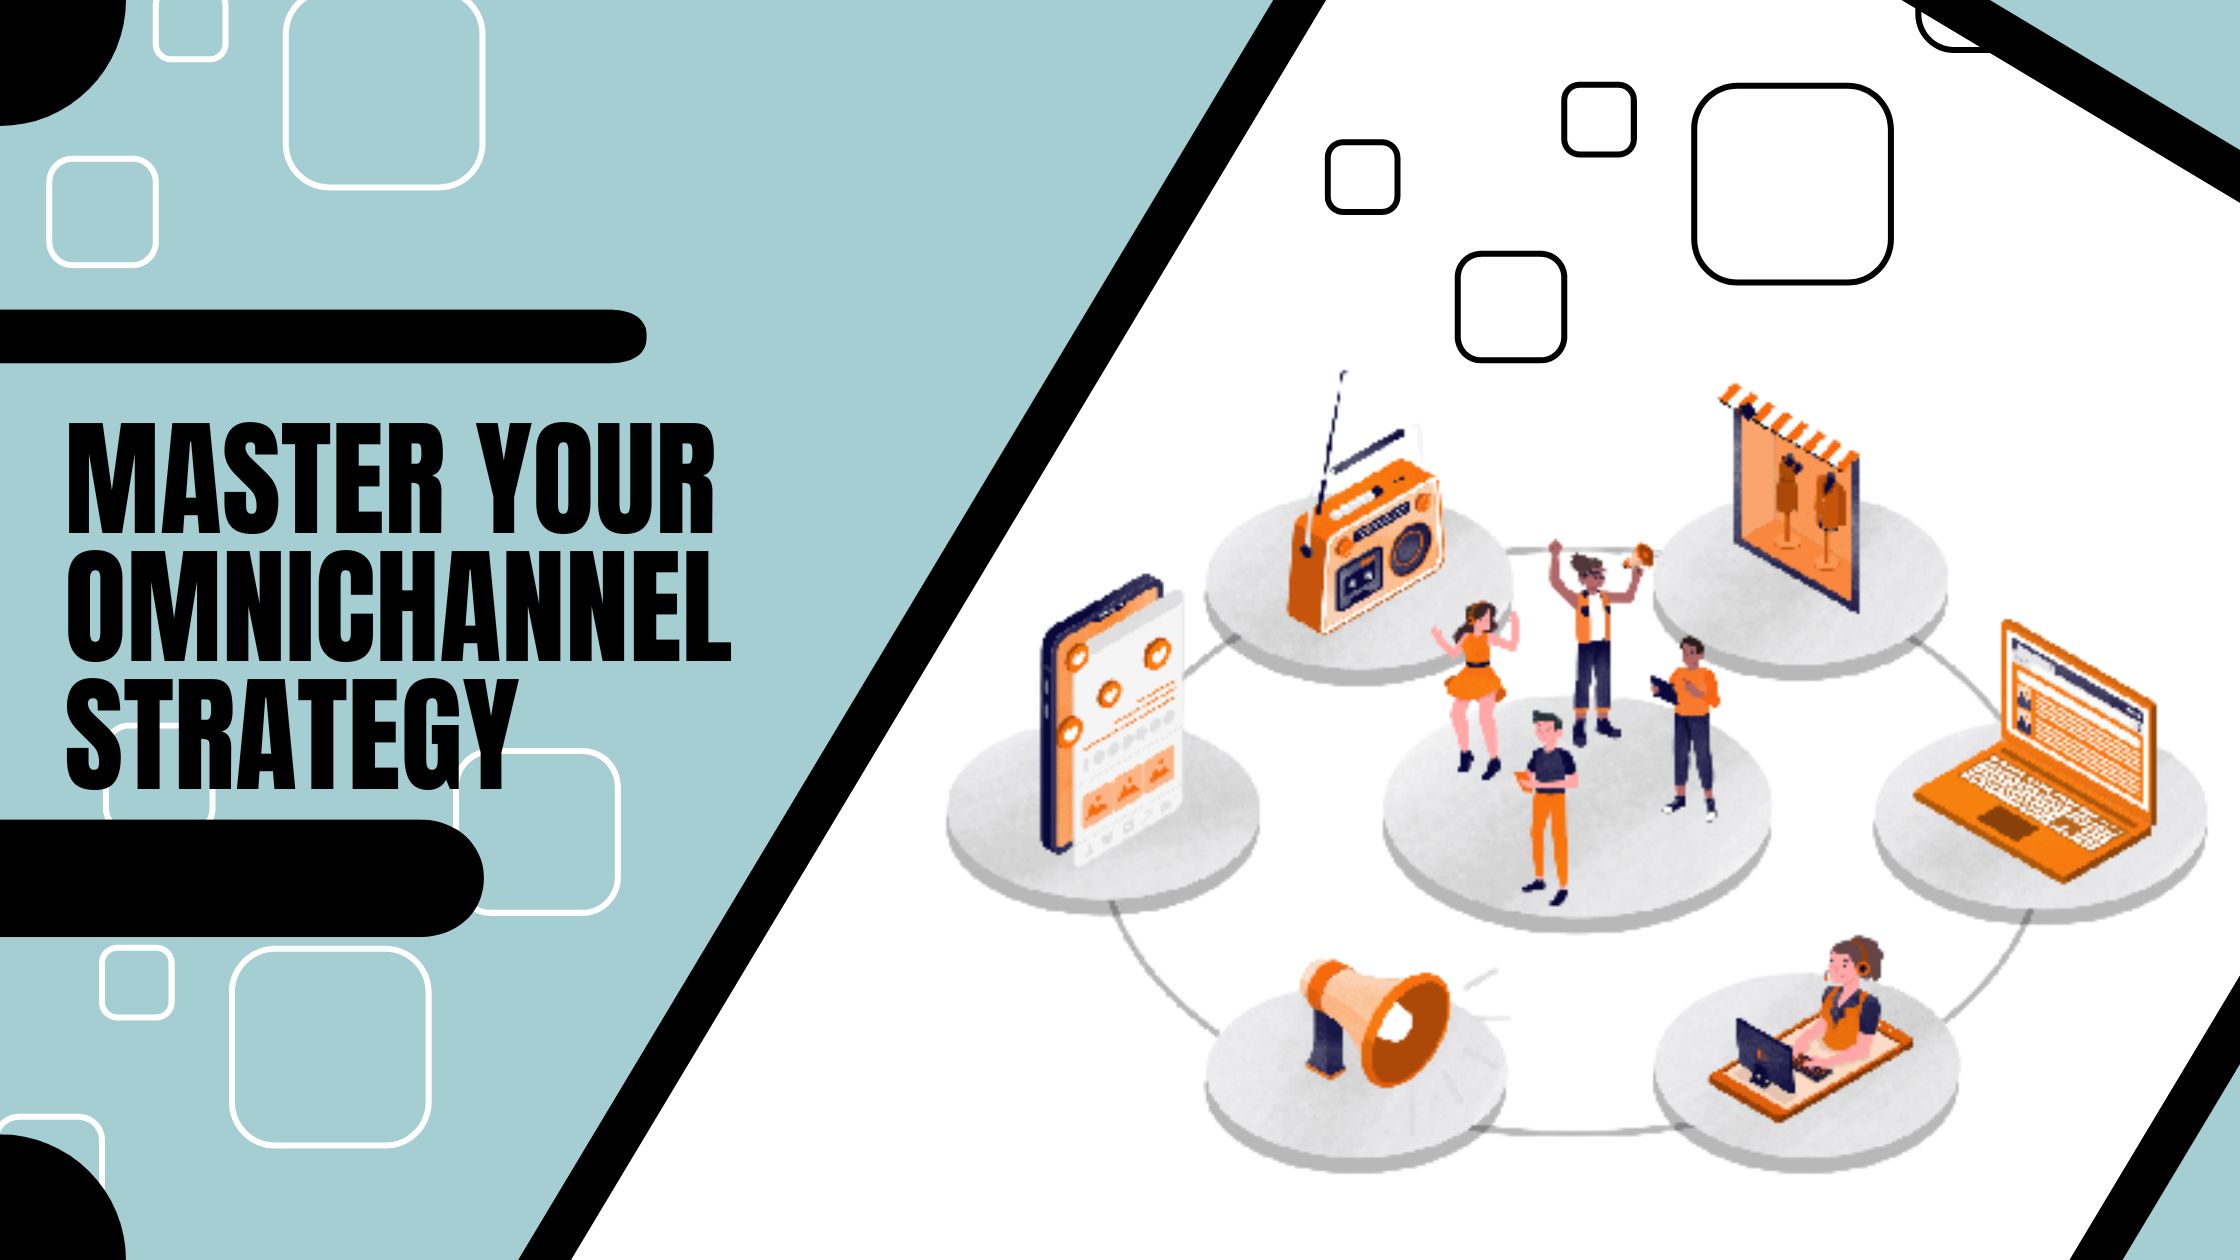 What Tools Do You Need to Master Your Omnichannel Strategy